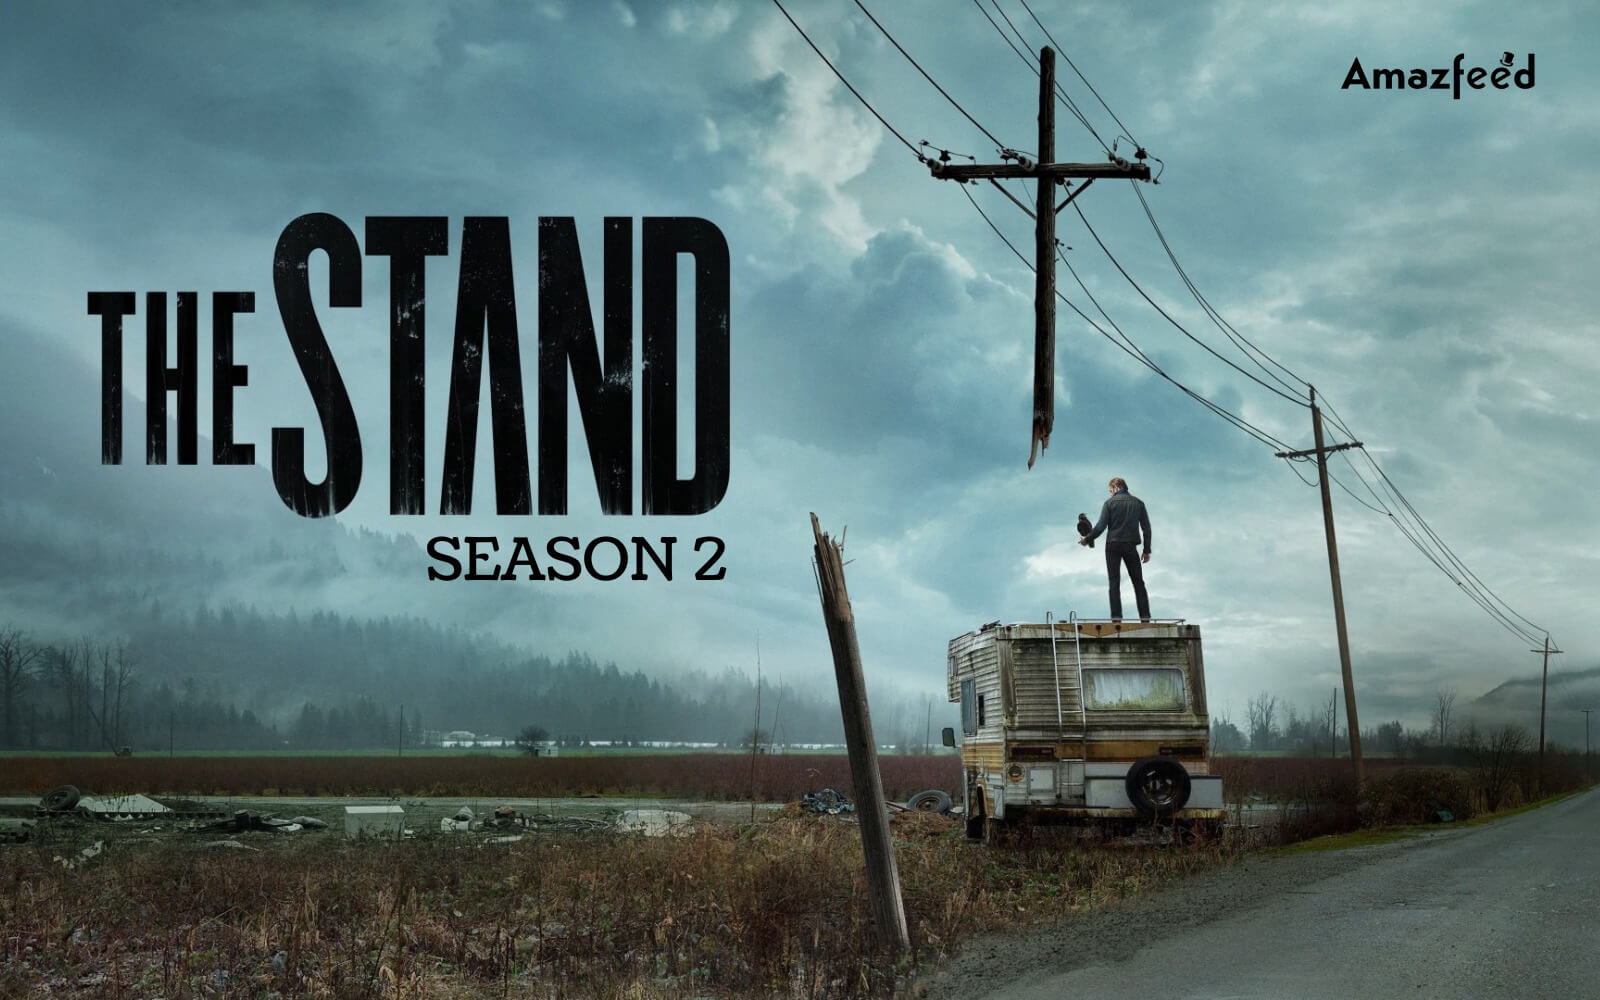 The Stand Season 2 Release date